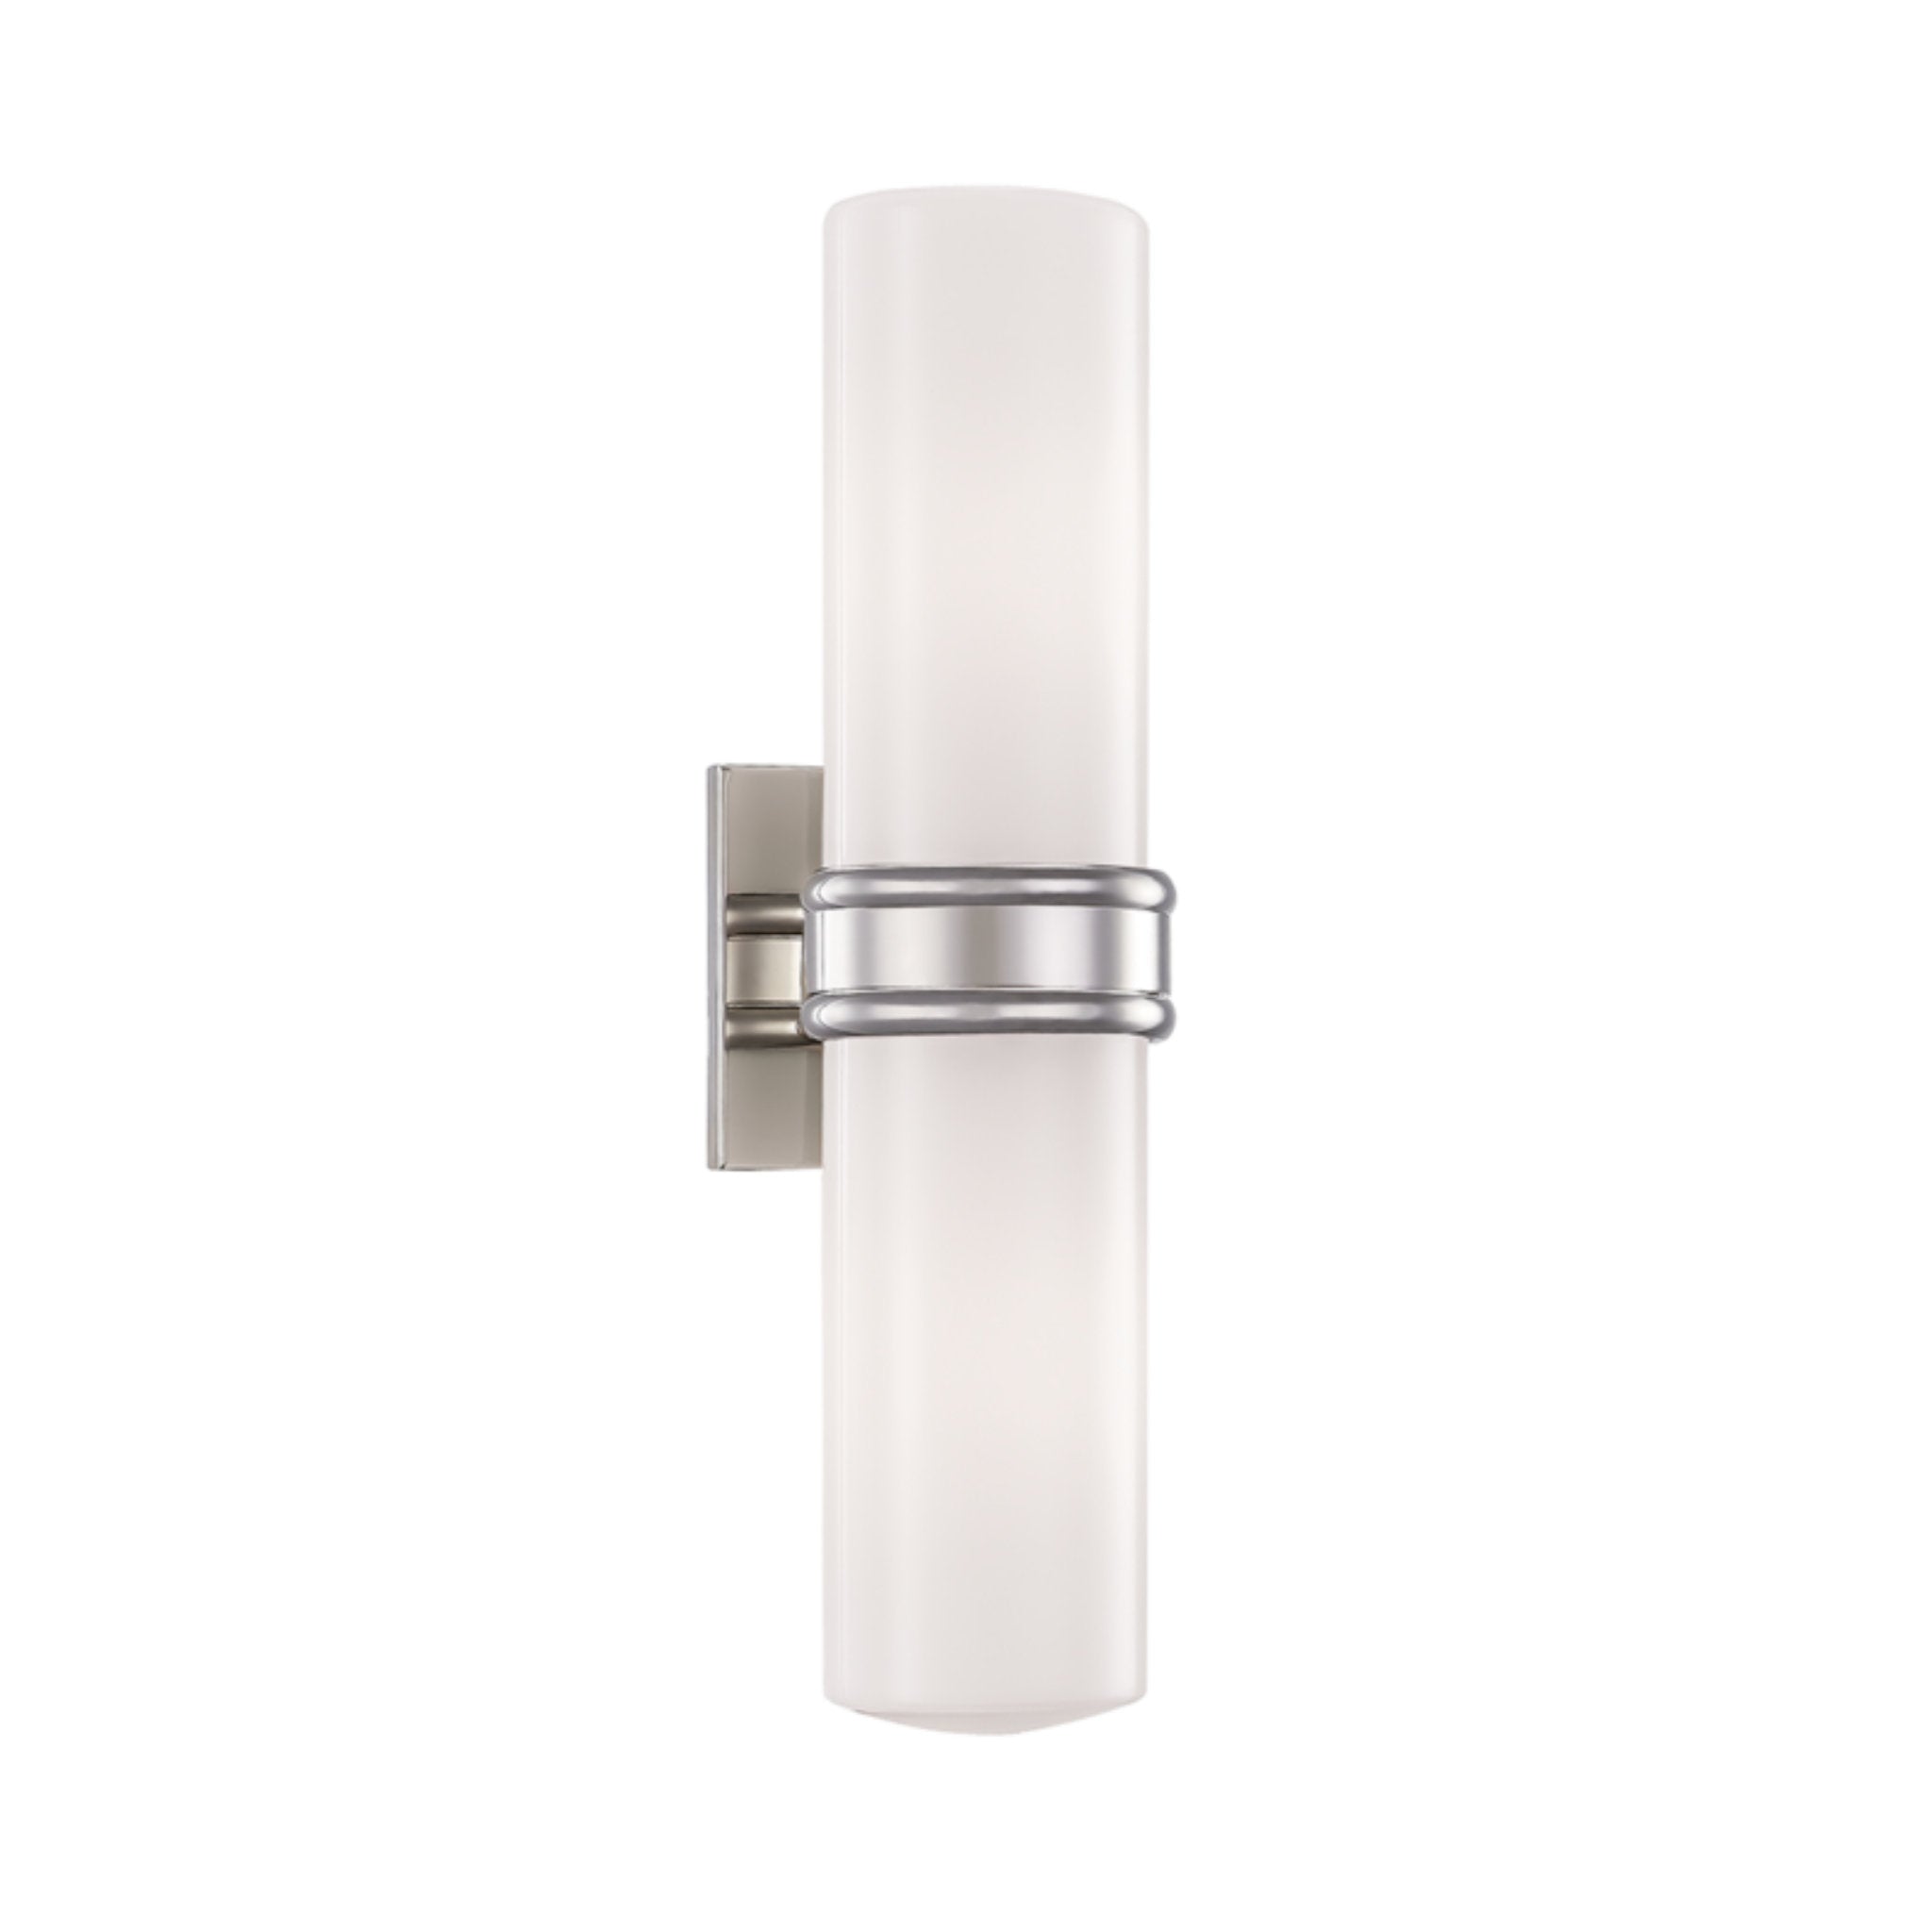 Natalie 2-Light Wall Sconce in Polished Nickel by Justin Crocker